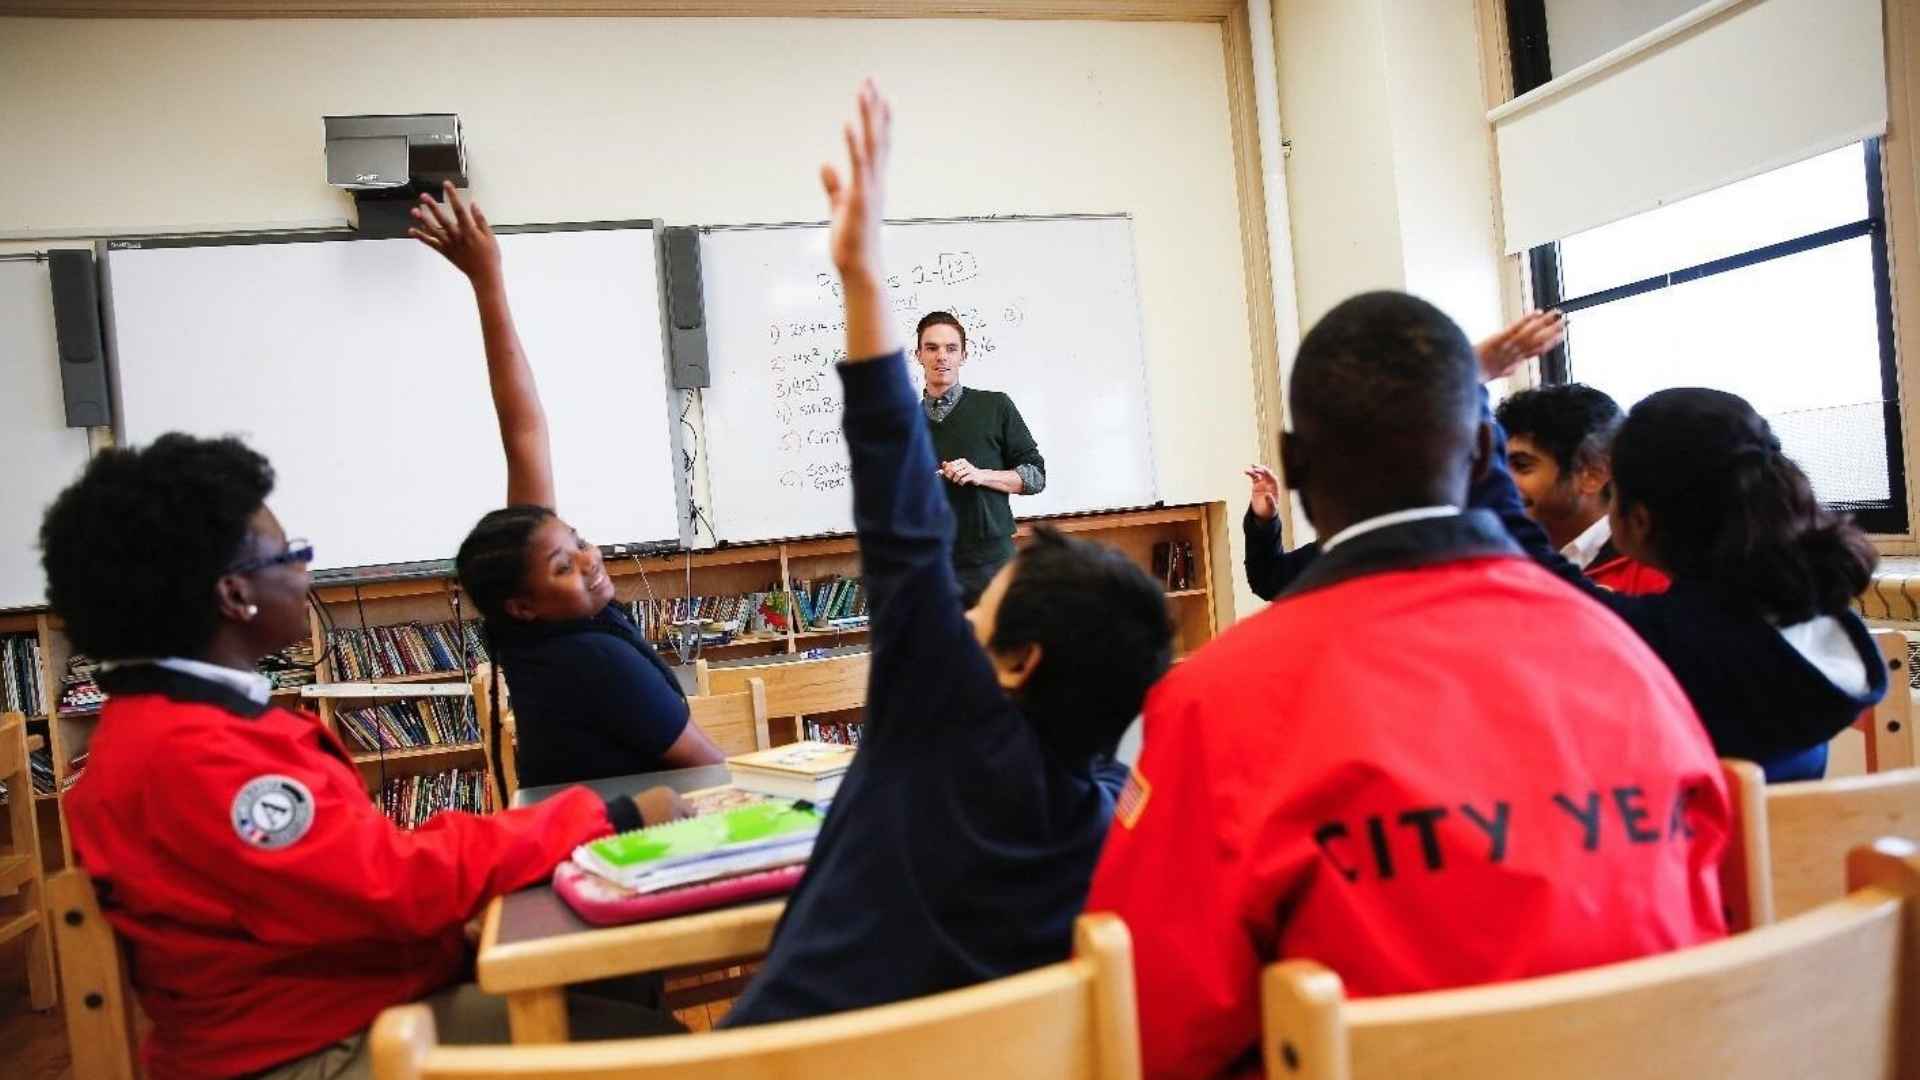 After earning his Bachelor of Science in molecular and cellular biology, he returned to California for a gap year and served as a volunteer with City Year Los Angeles through AmeriCorps, teaching and helping underserved youth, both in the classroom, with homework and after school recreational activities.